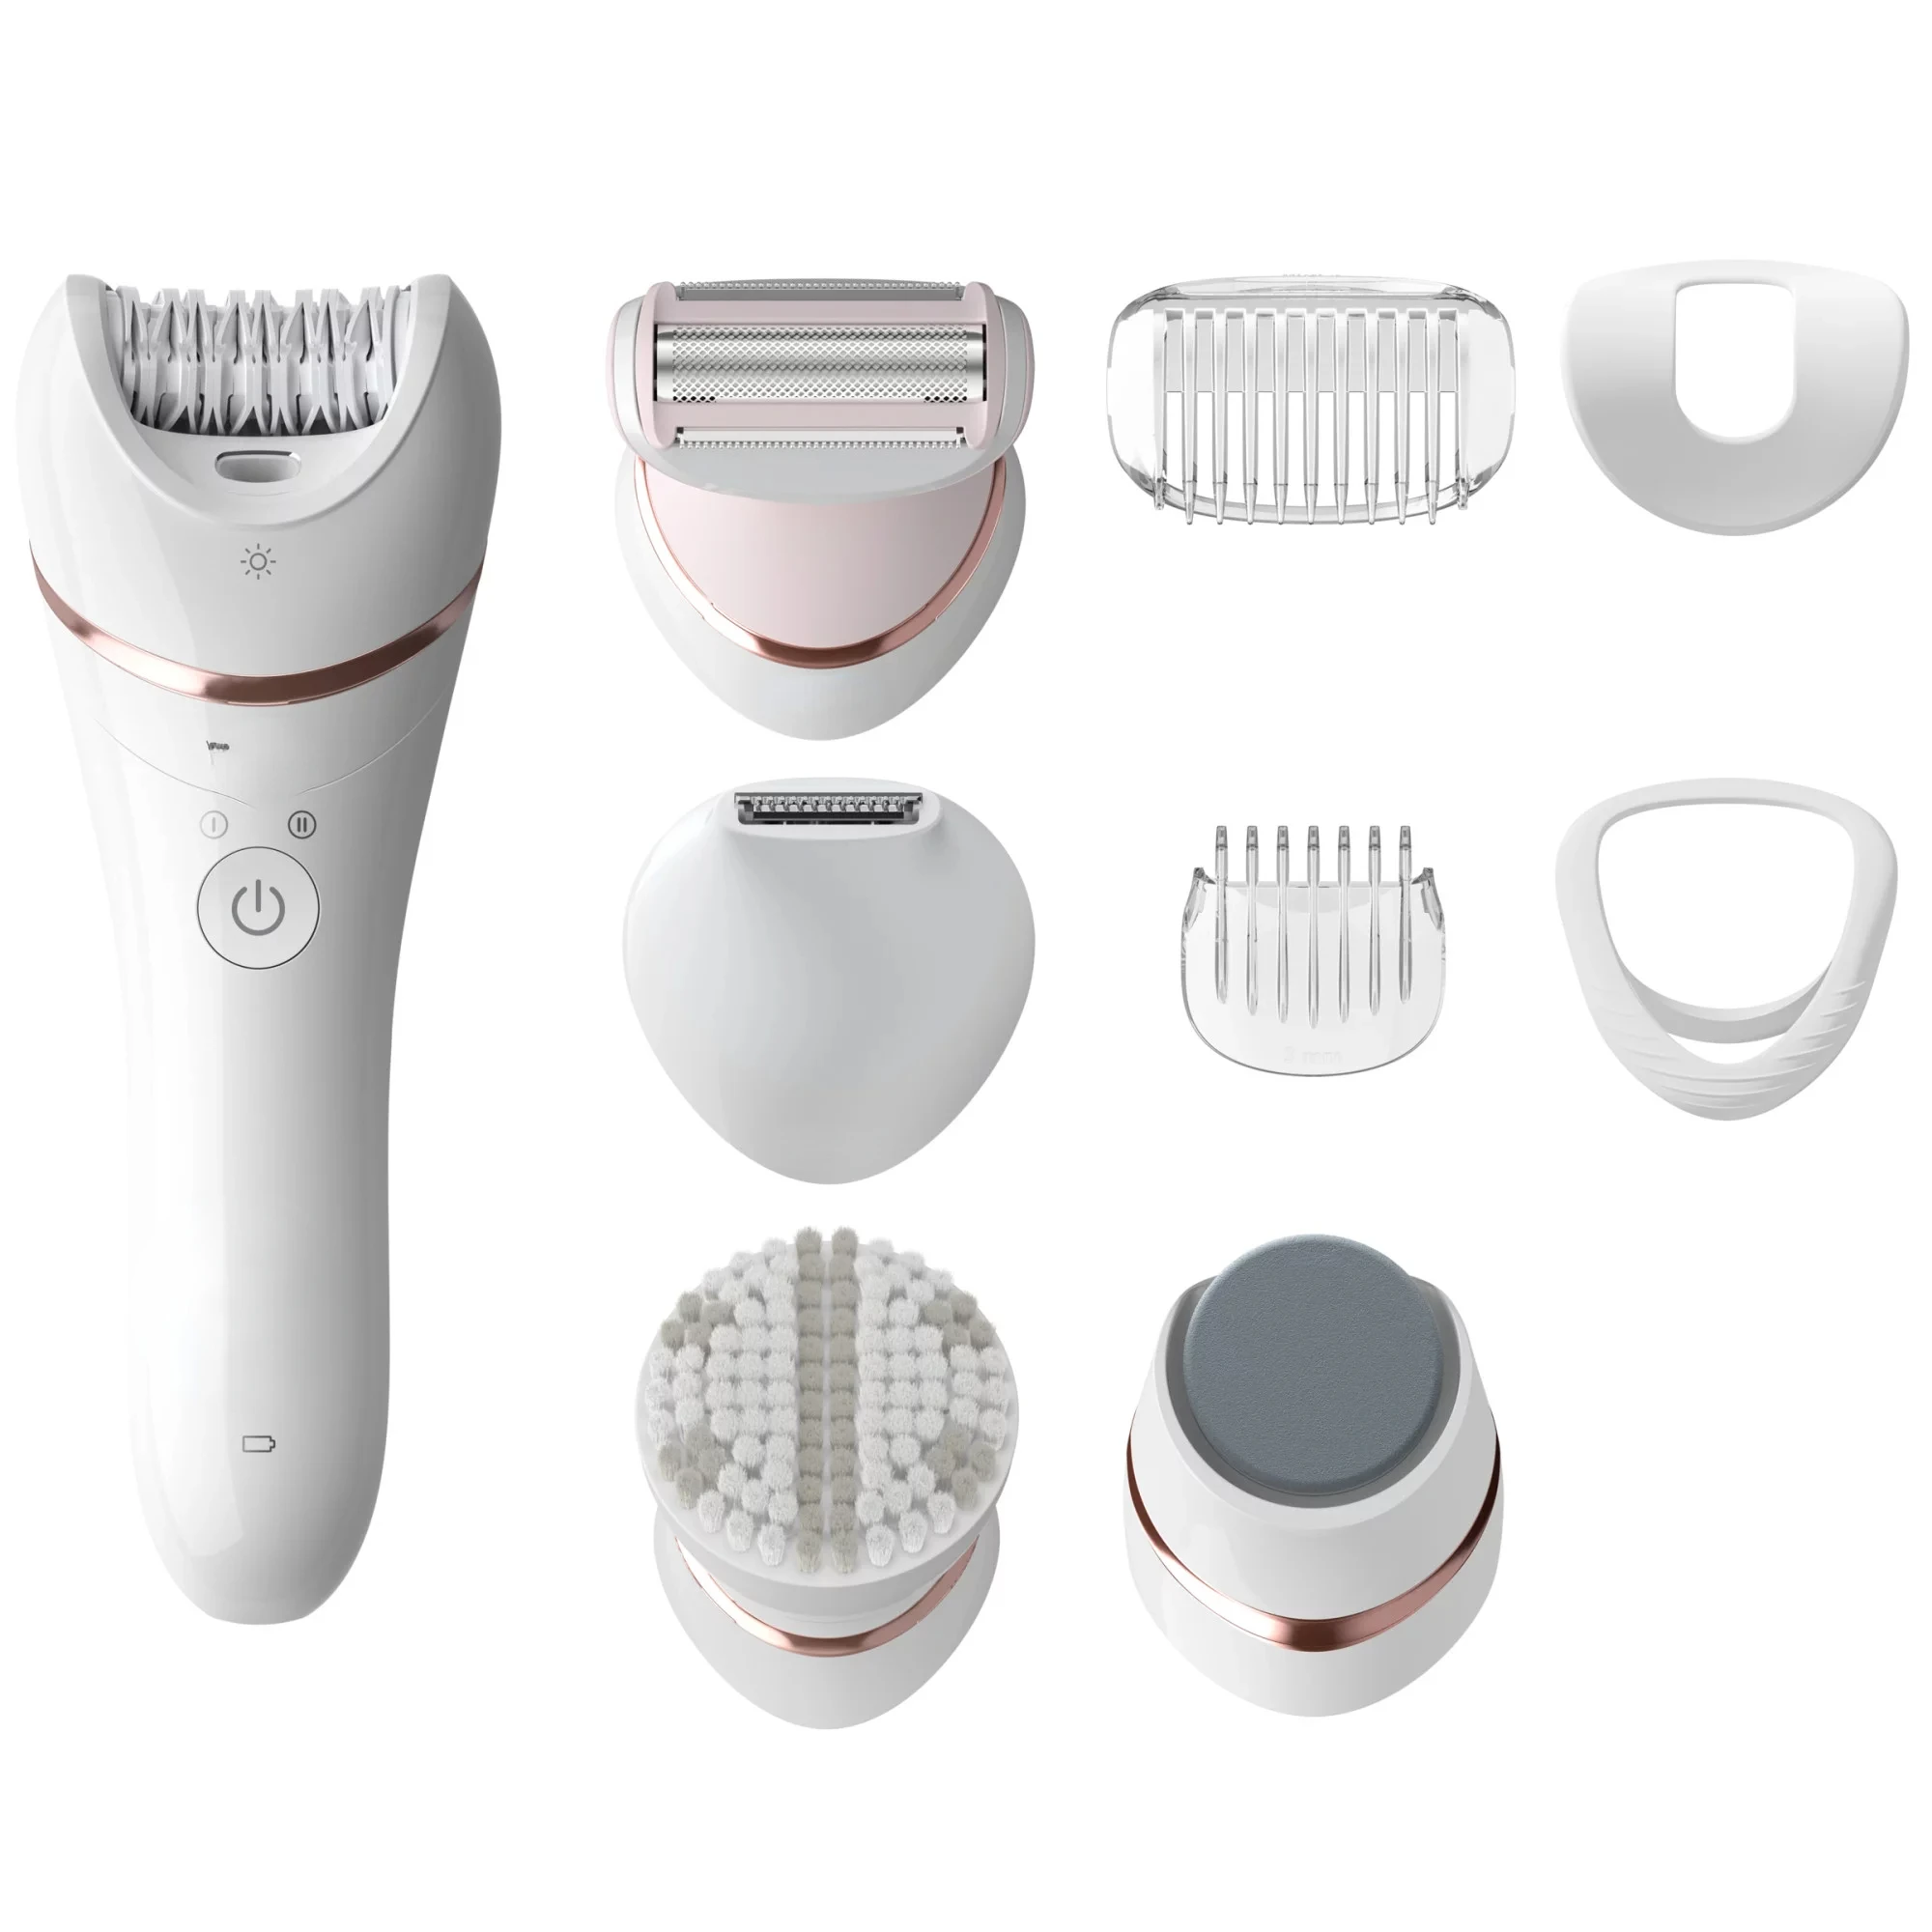 

Series 8000 5 In 1 Shaver, Trimmer, Pedicure and Body Exfoliator with 9 Accessories Beard trimmer for men Trimmer for men Shaver